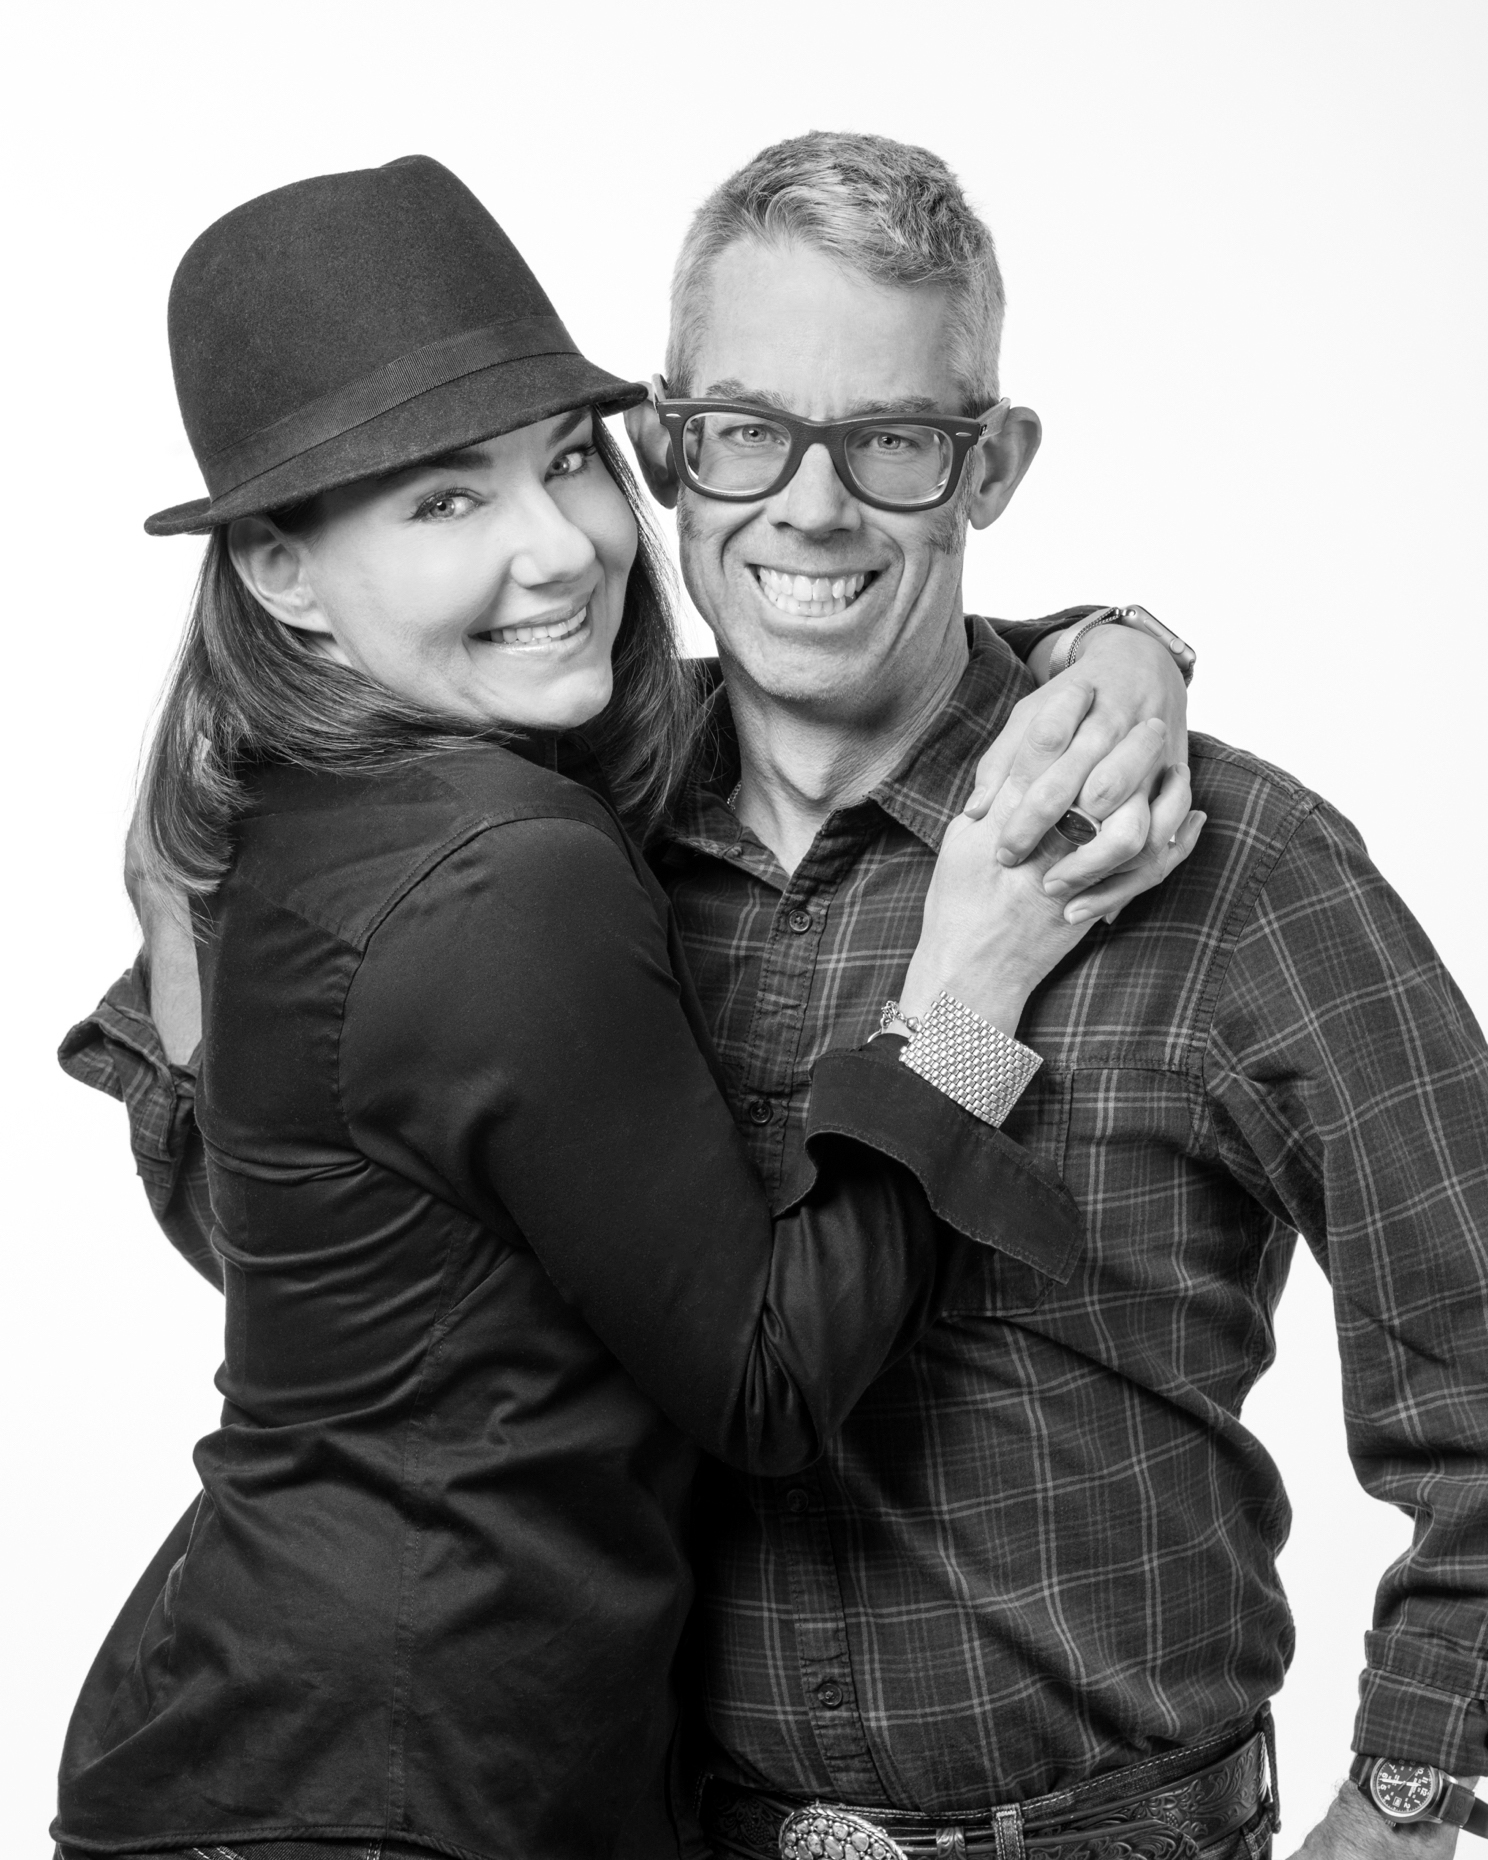 Black & white studio portrait of hip young married couple